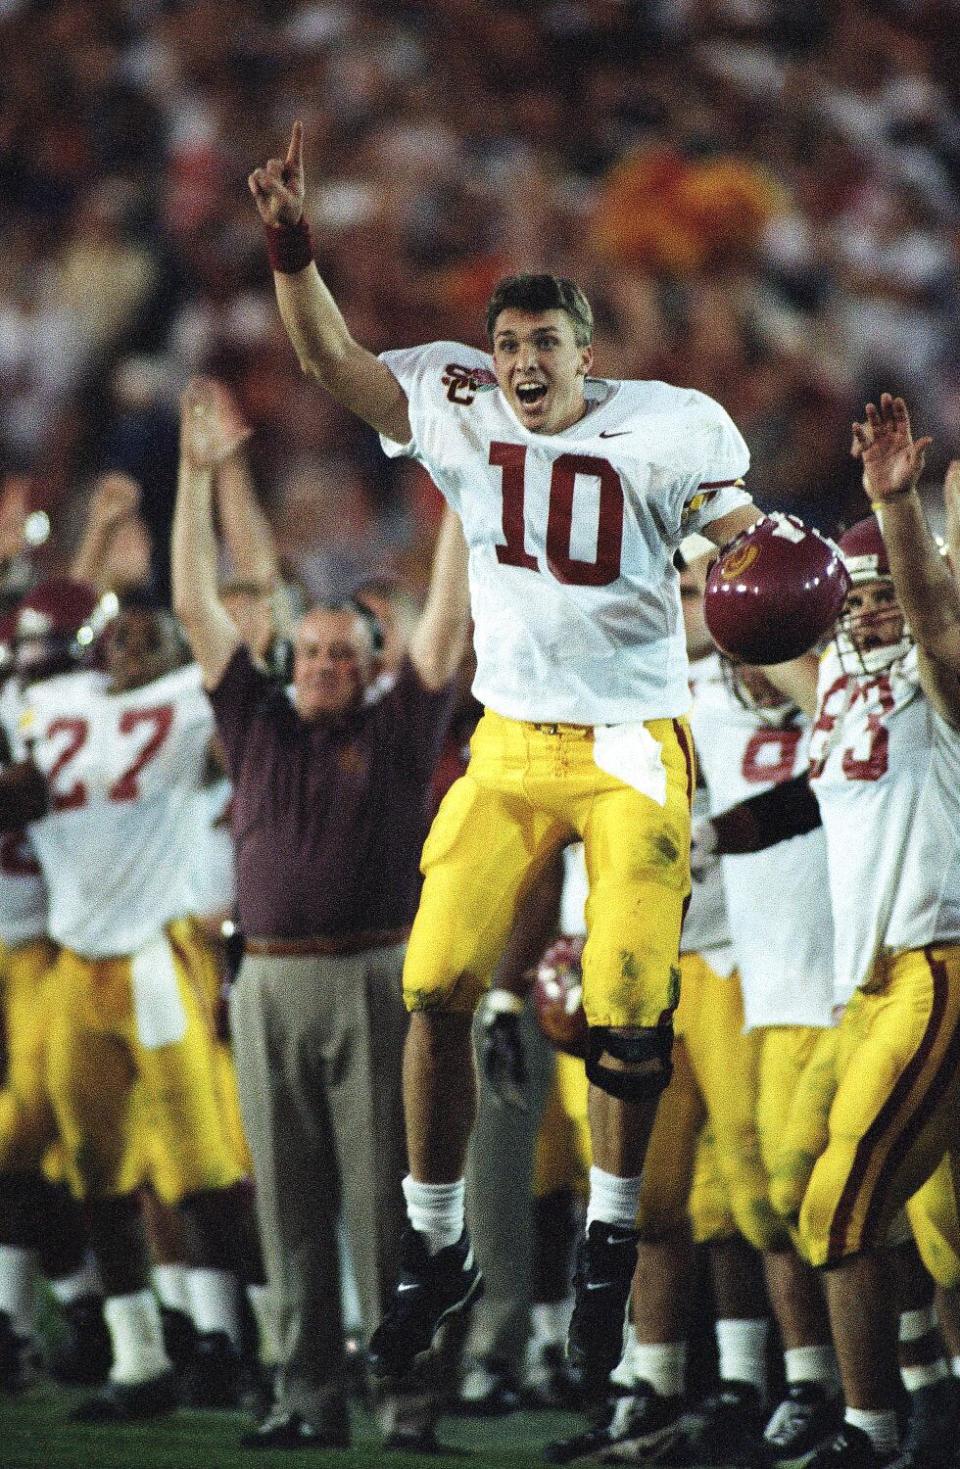 USC quarterback Brad Otton (10) celebrates on the sidelines after the Trojans defeated Northwestern in the Rose Bowl